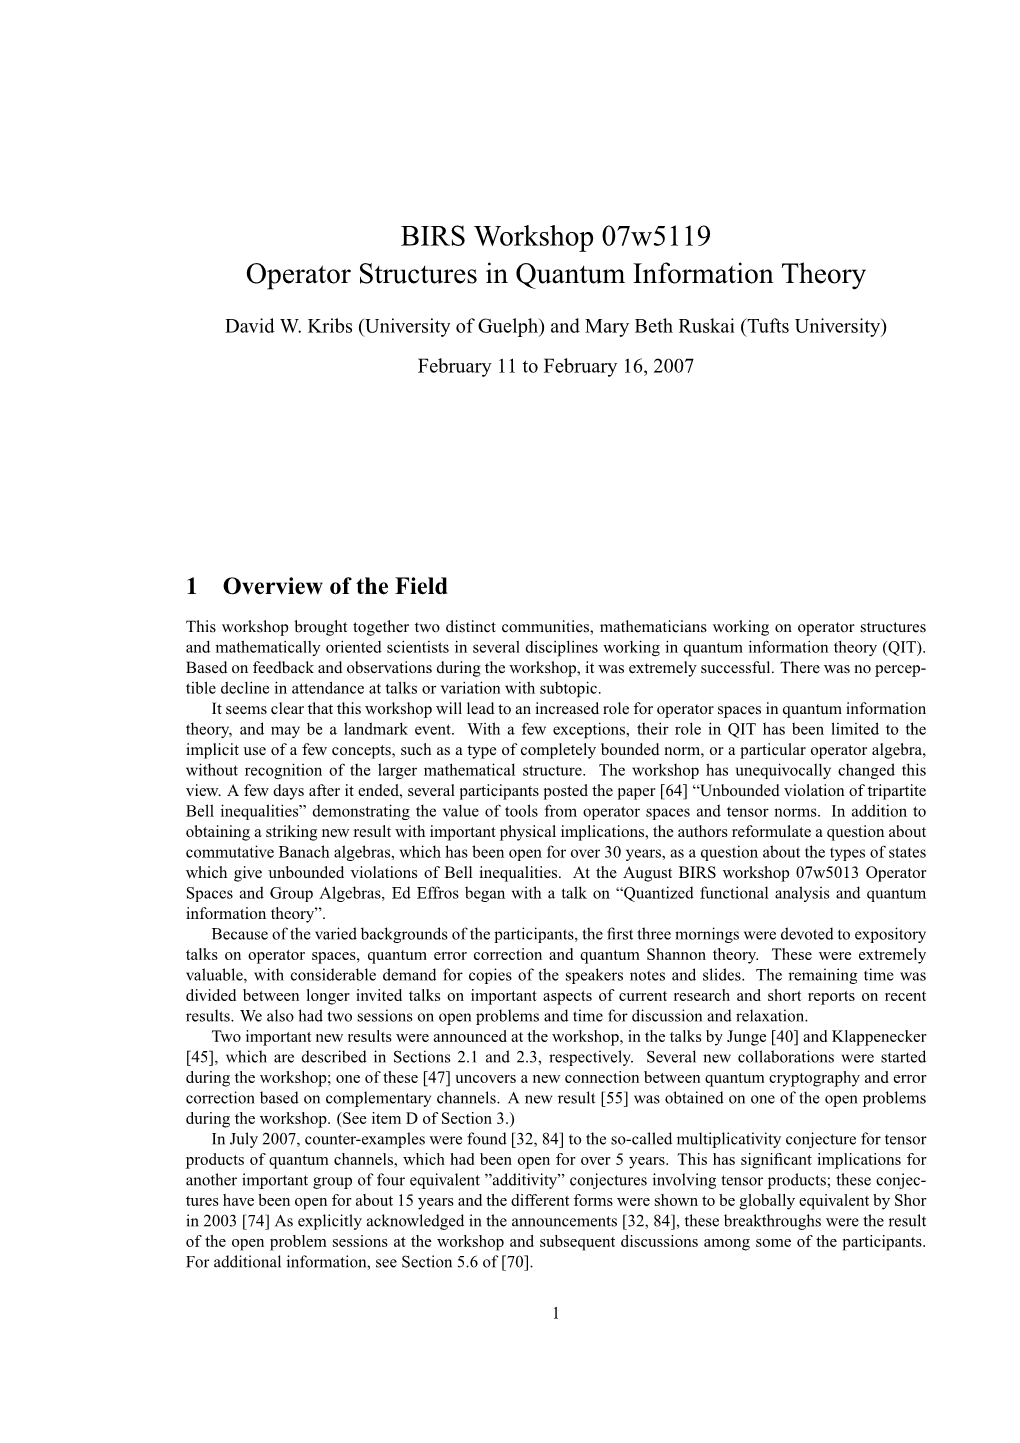 BIRS Workshop 07W5119 Operator Structures in Quantum Information Theory